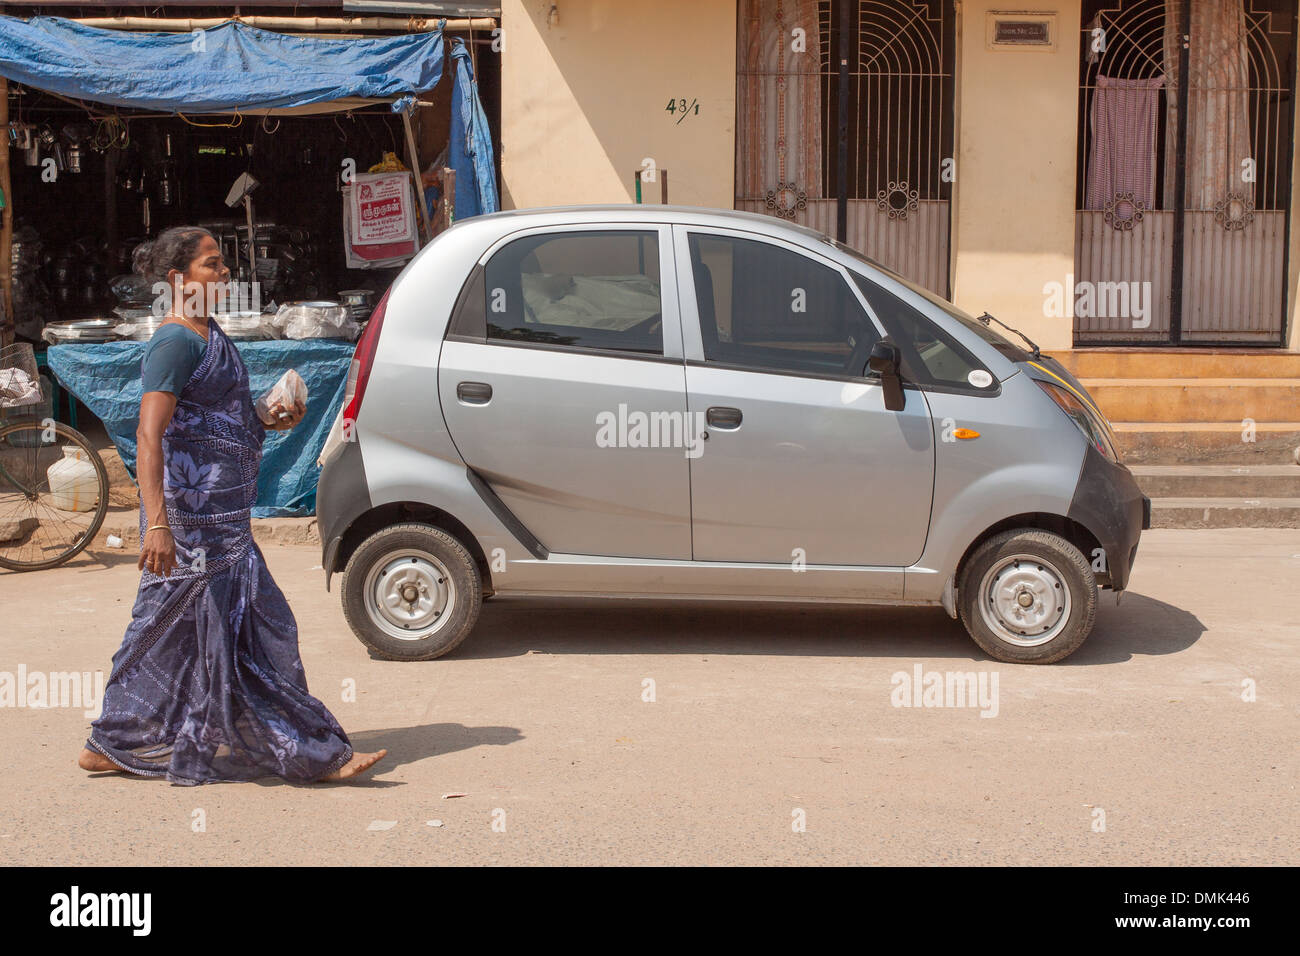 INDIAN WOMAN DRESSED IN A TRADITIONAL SARI PASSING IN FRONT OF A TATA NANO CAR, CONTRAST BETWEEN TRADITIONS AND MODERNITY, MADURAI, STATE OF TAMIL NADU, IINDIA Stock Photo